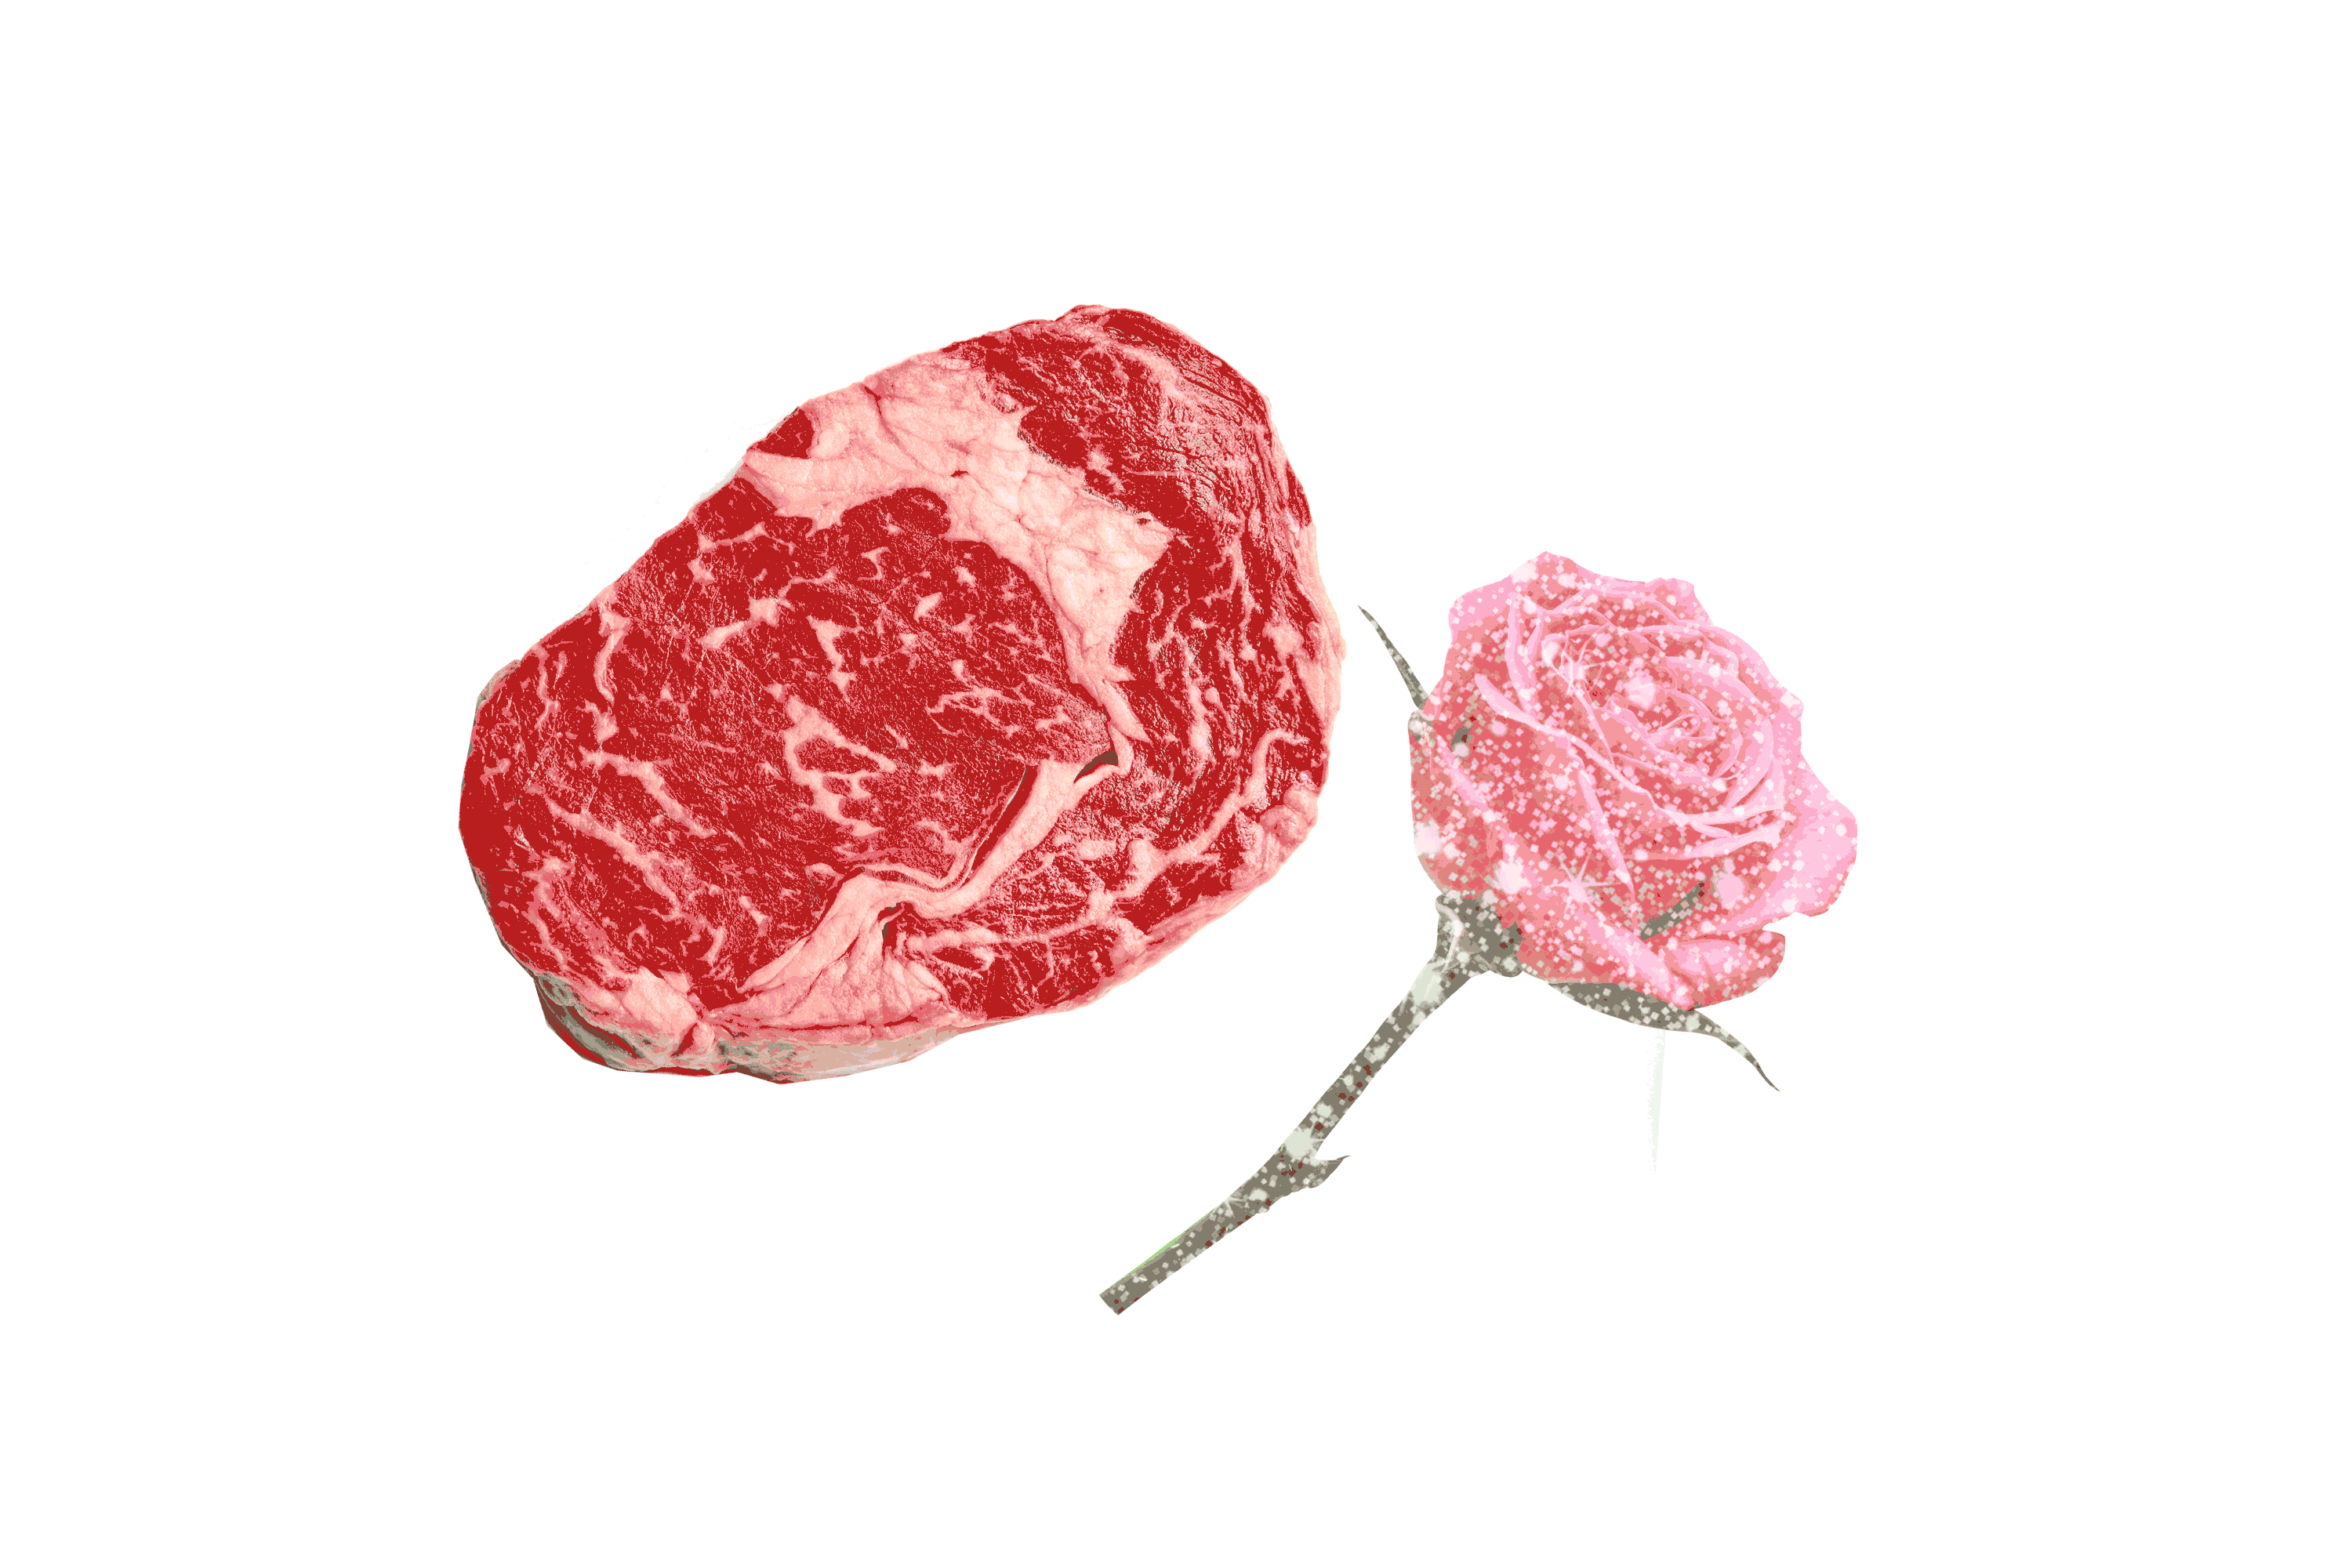 A GIF of a steak and a sparkly rose